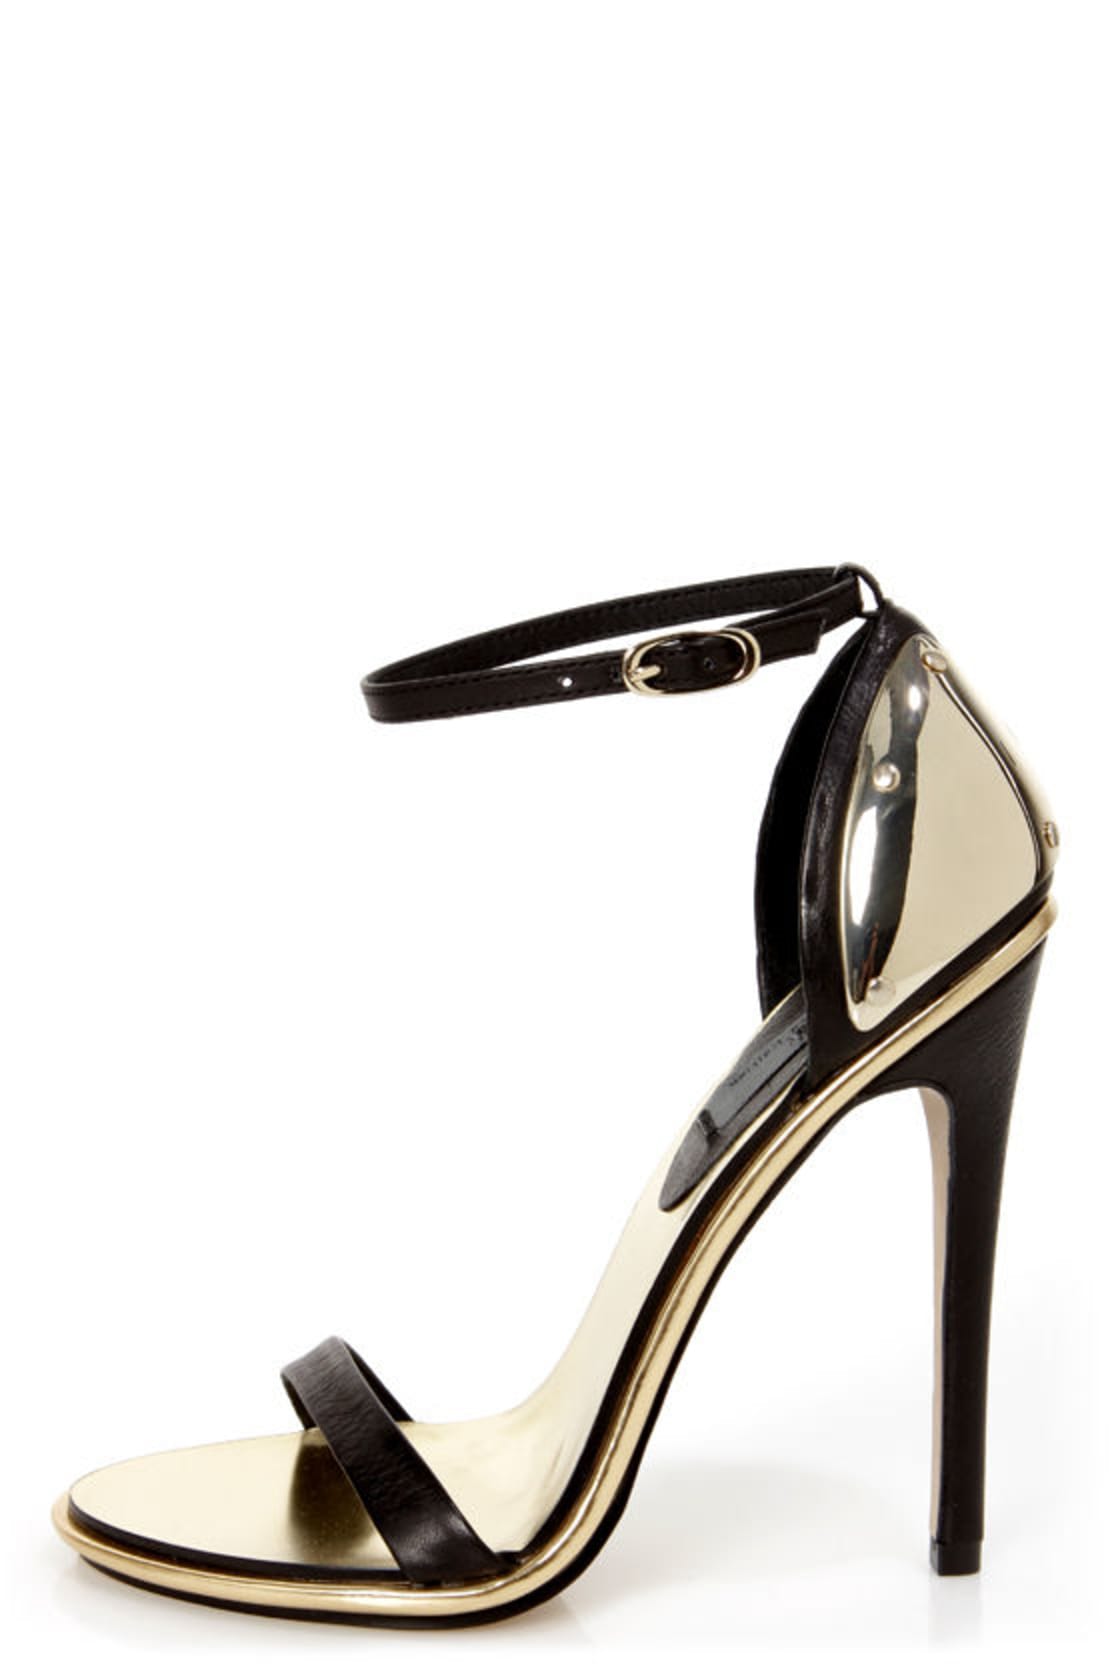 Mia Limited Edition Lenny Black & Gold Plated High Heel Sandals - $139. ...